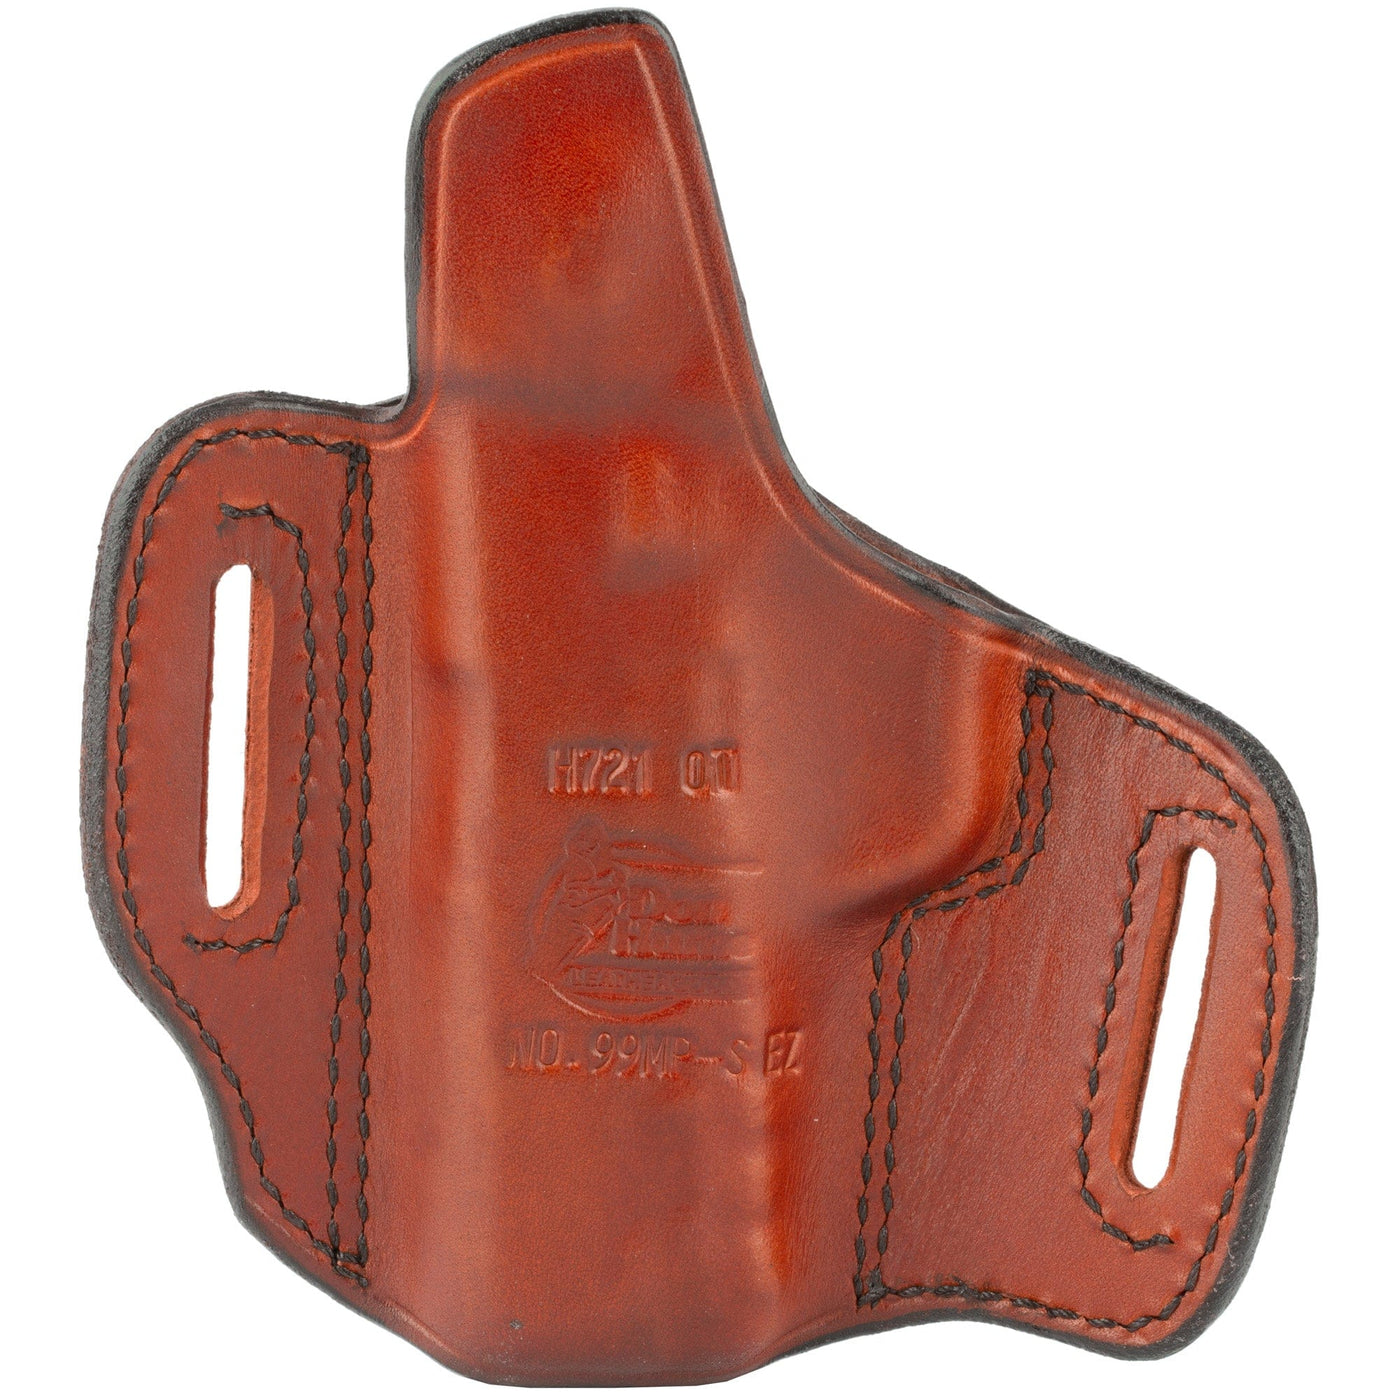 Don Hume D Hume 721ot Sw M&p Shield Ez Rh Holsters